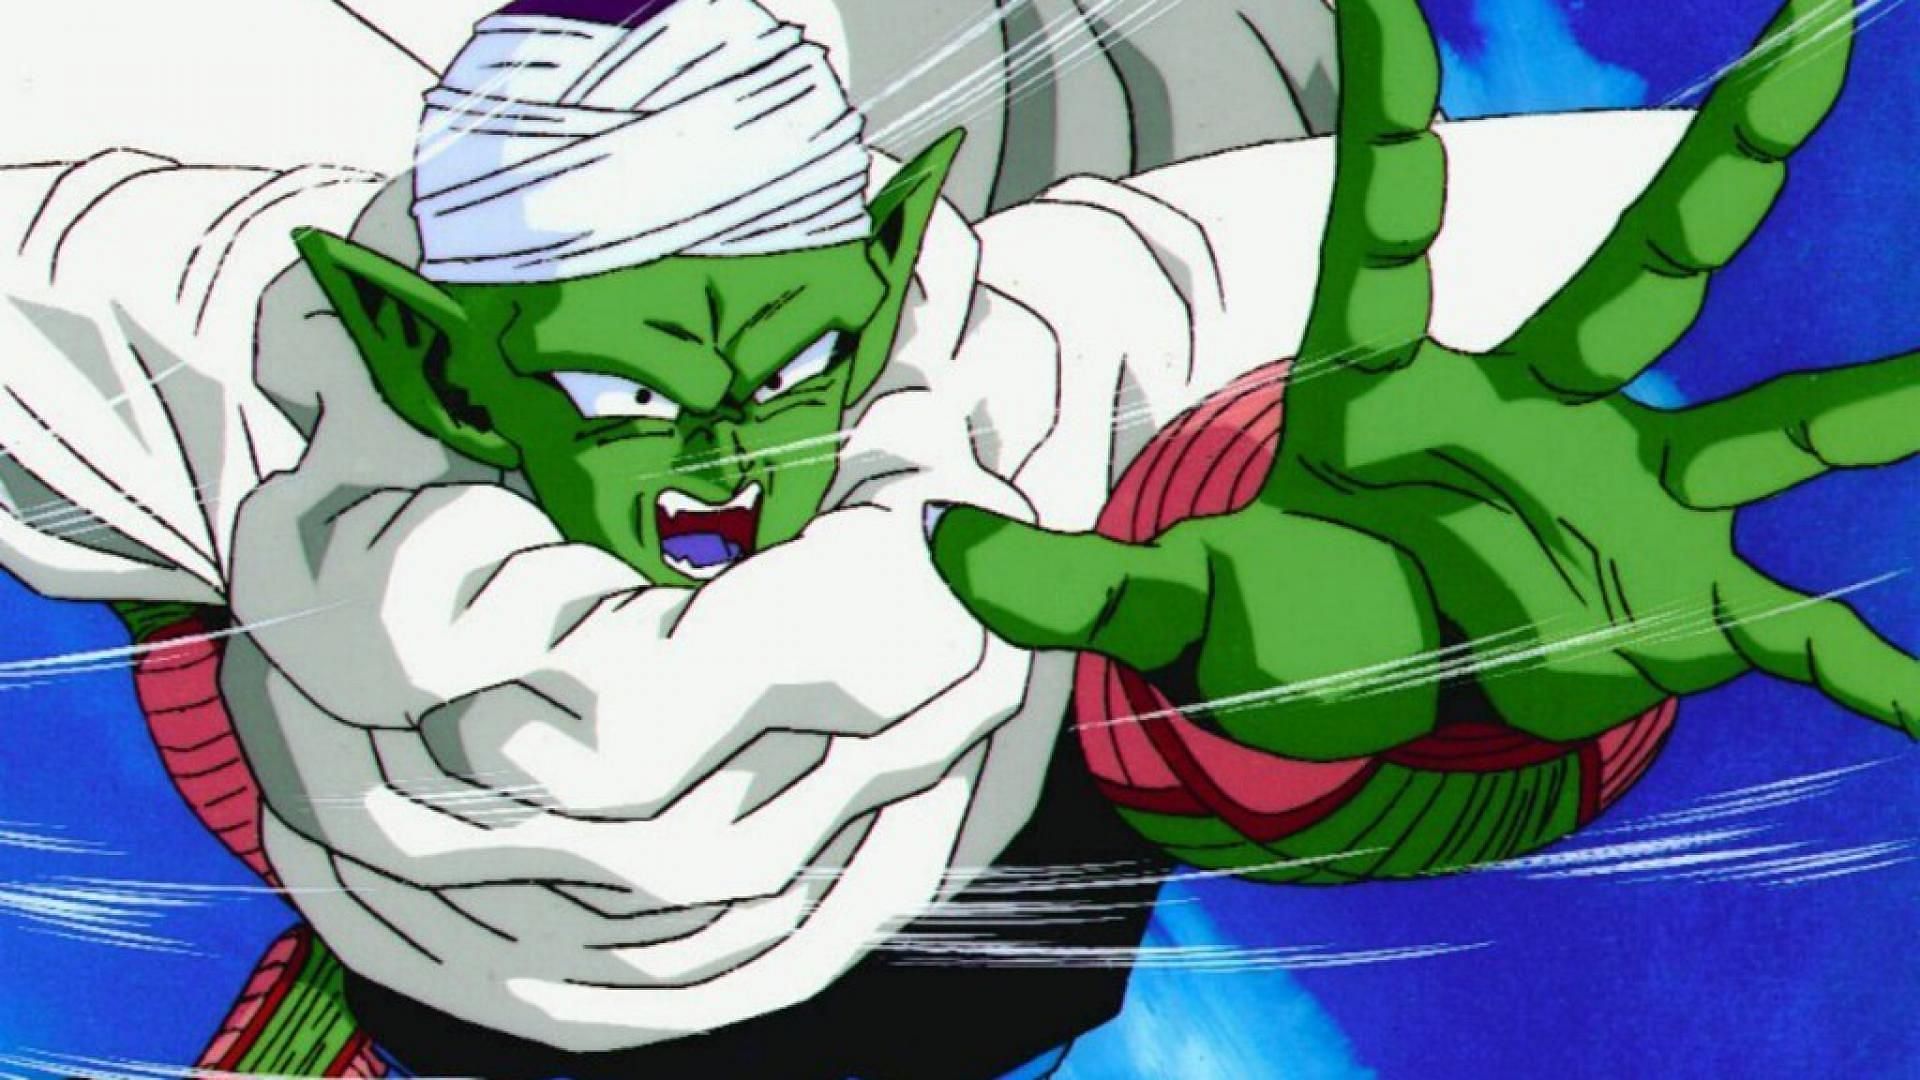 Piccolo&#039;s new form is all that fans are talking about in anticipation of the newest Dragon Ball film (Image Credits: Akira Toriyama/Shueisha, Viz Media, Dragon Ball Z)